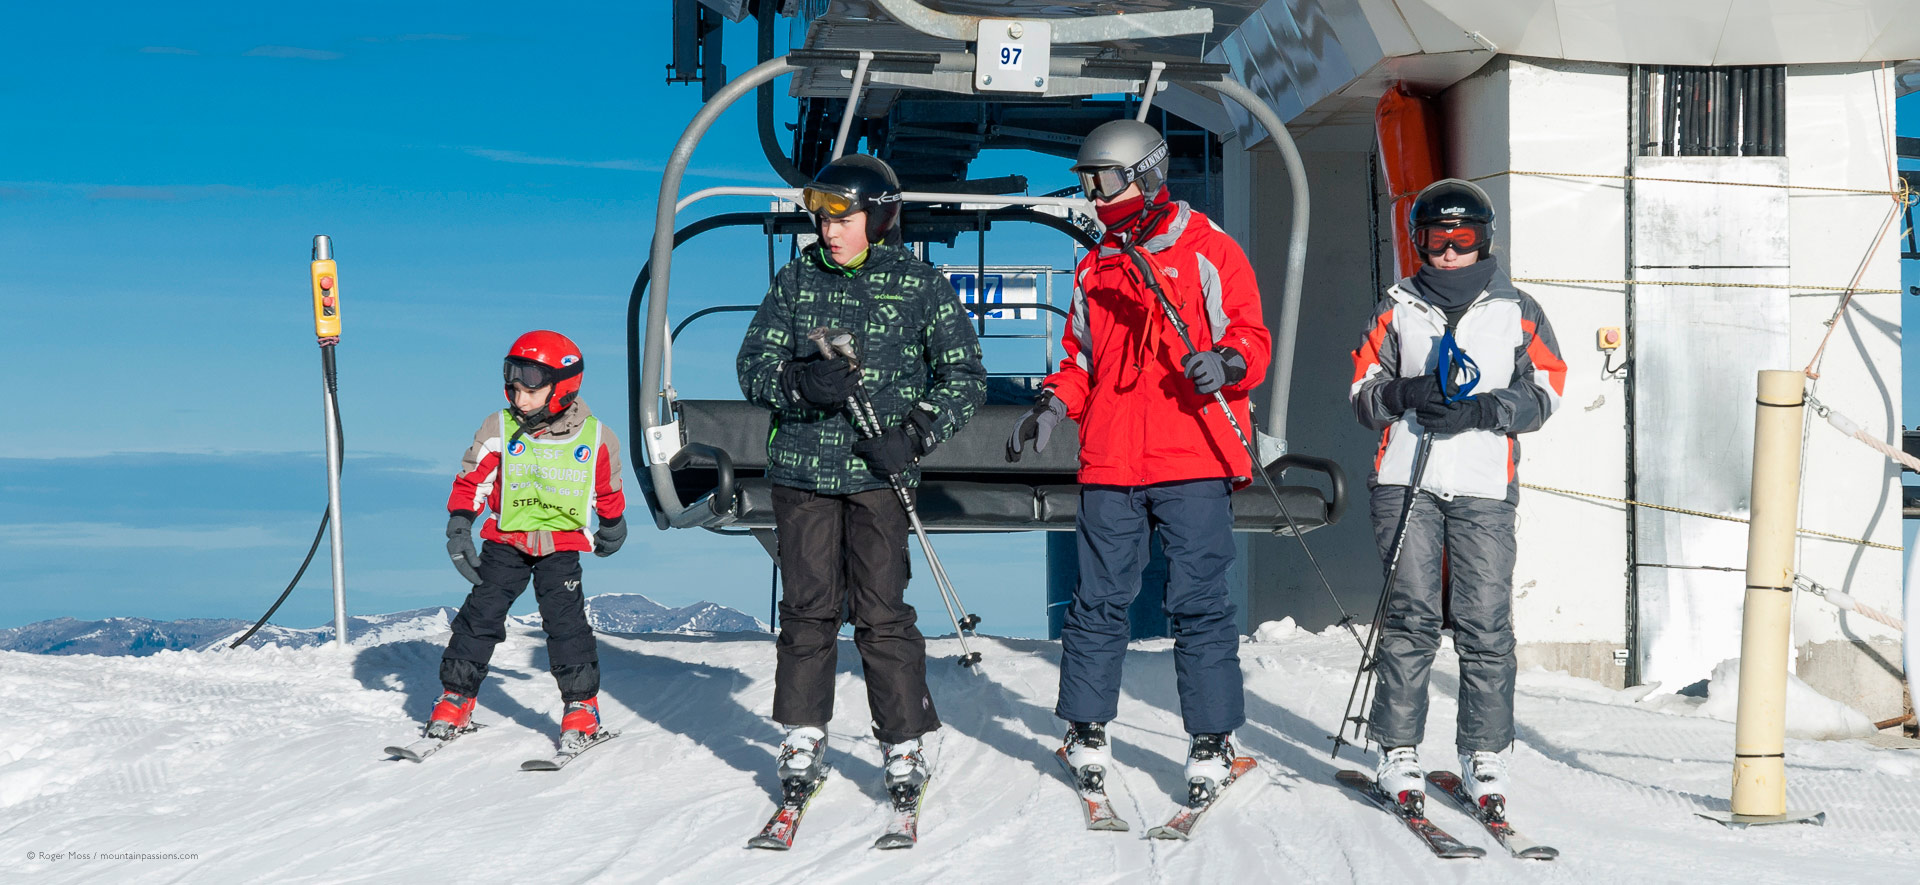 Skier family leaving top station of chair lift